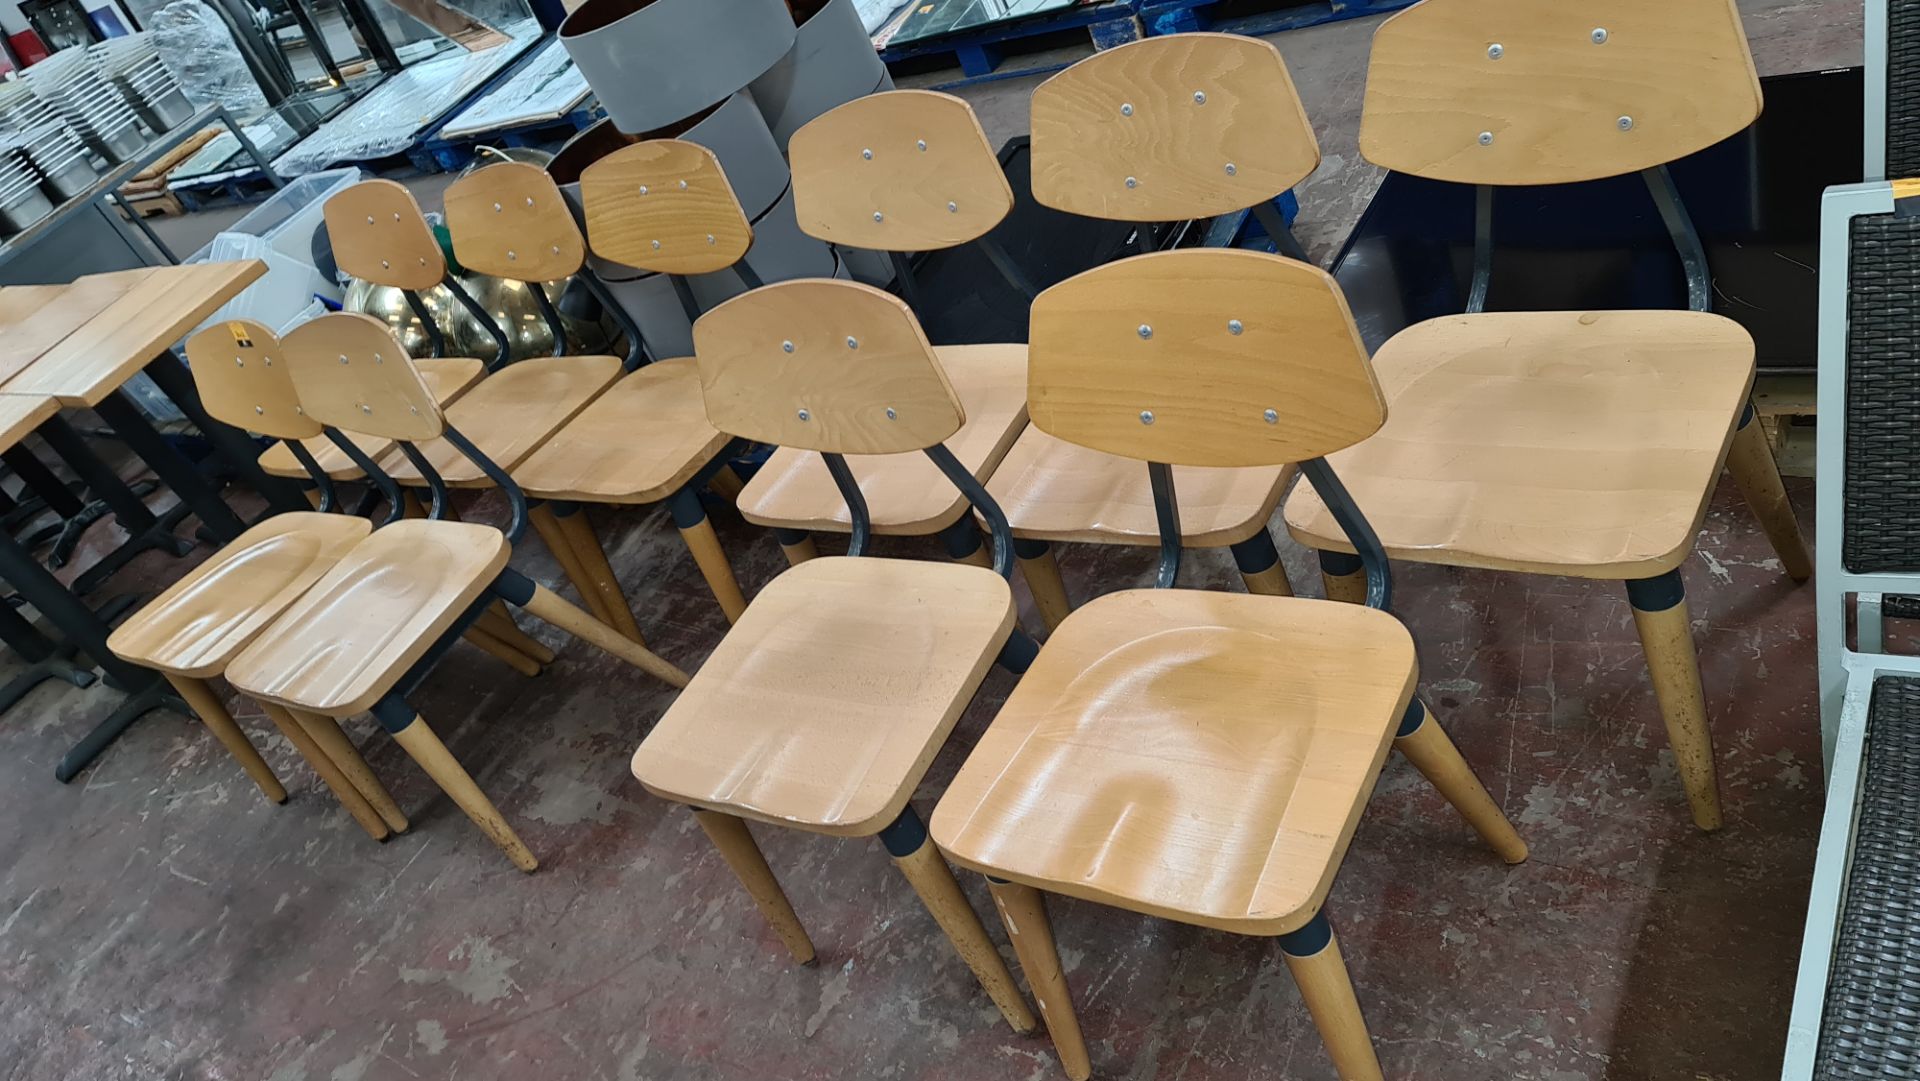 10 off matching metal & wooden chairs - Image 6 of 6